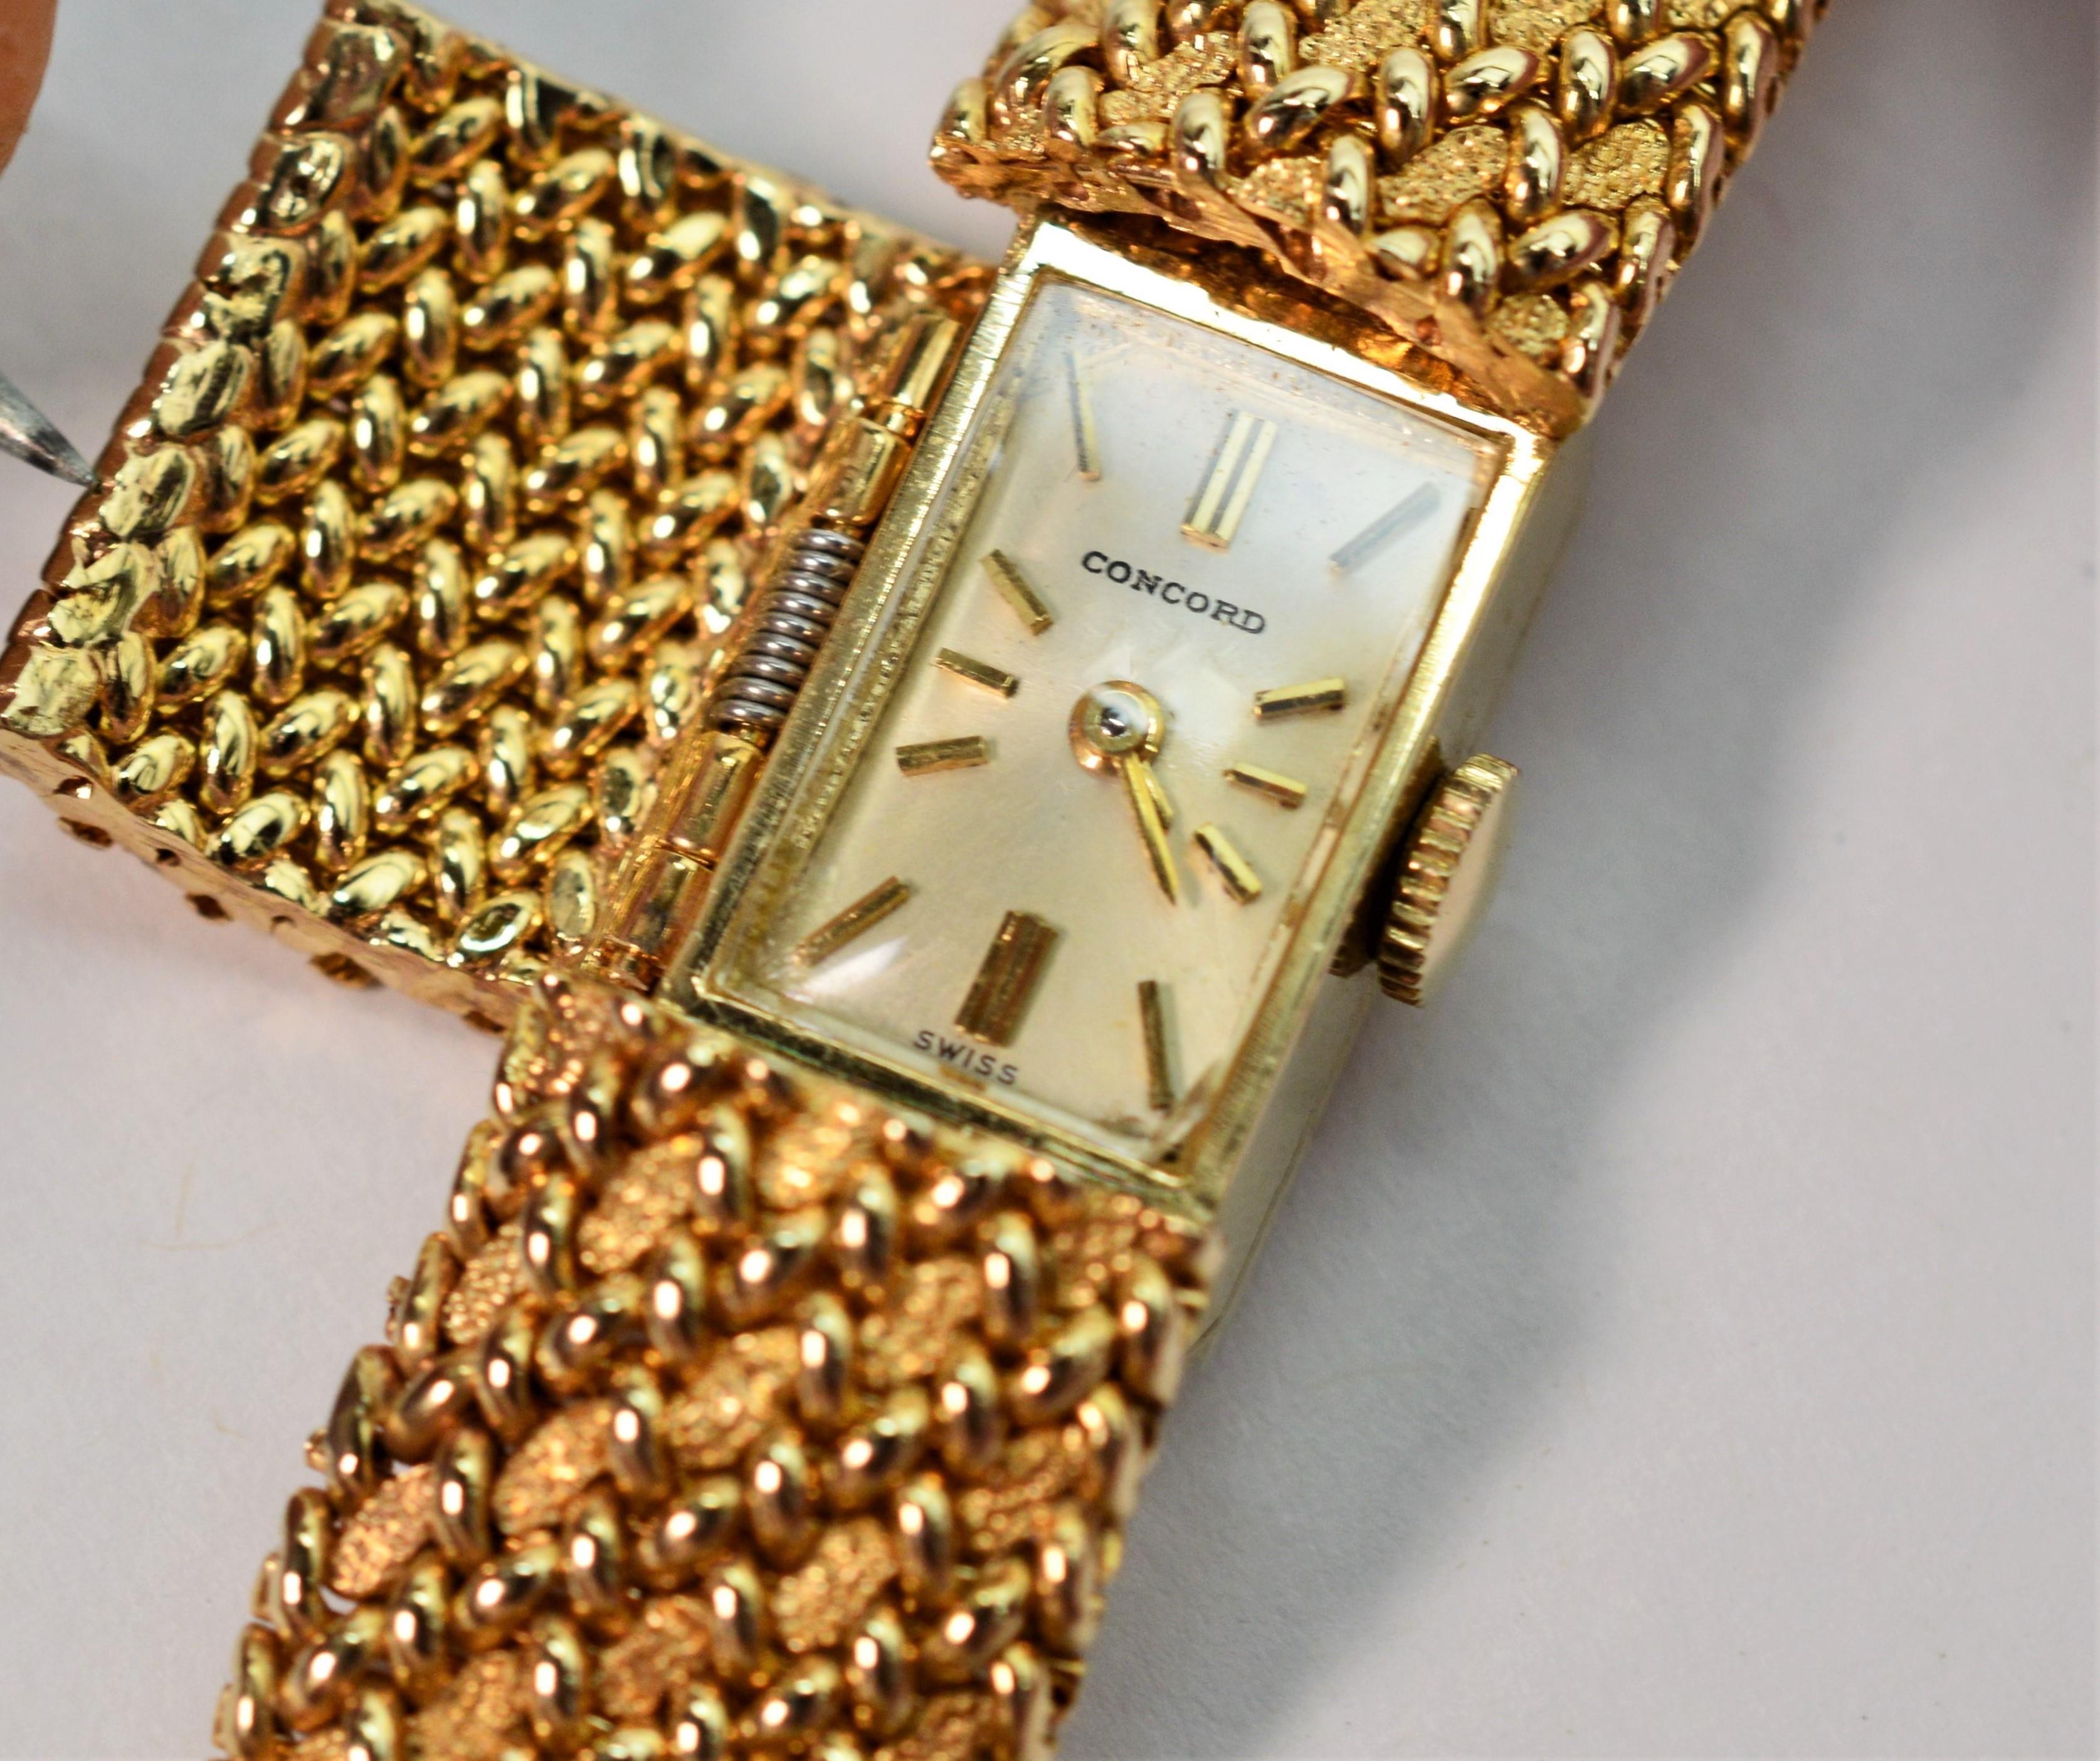 Woven Gold Mesh Bracelet with Mystery Watch by Concord For Sale 1